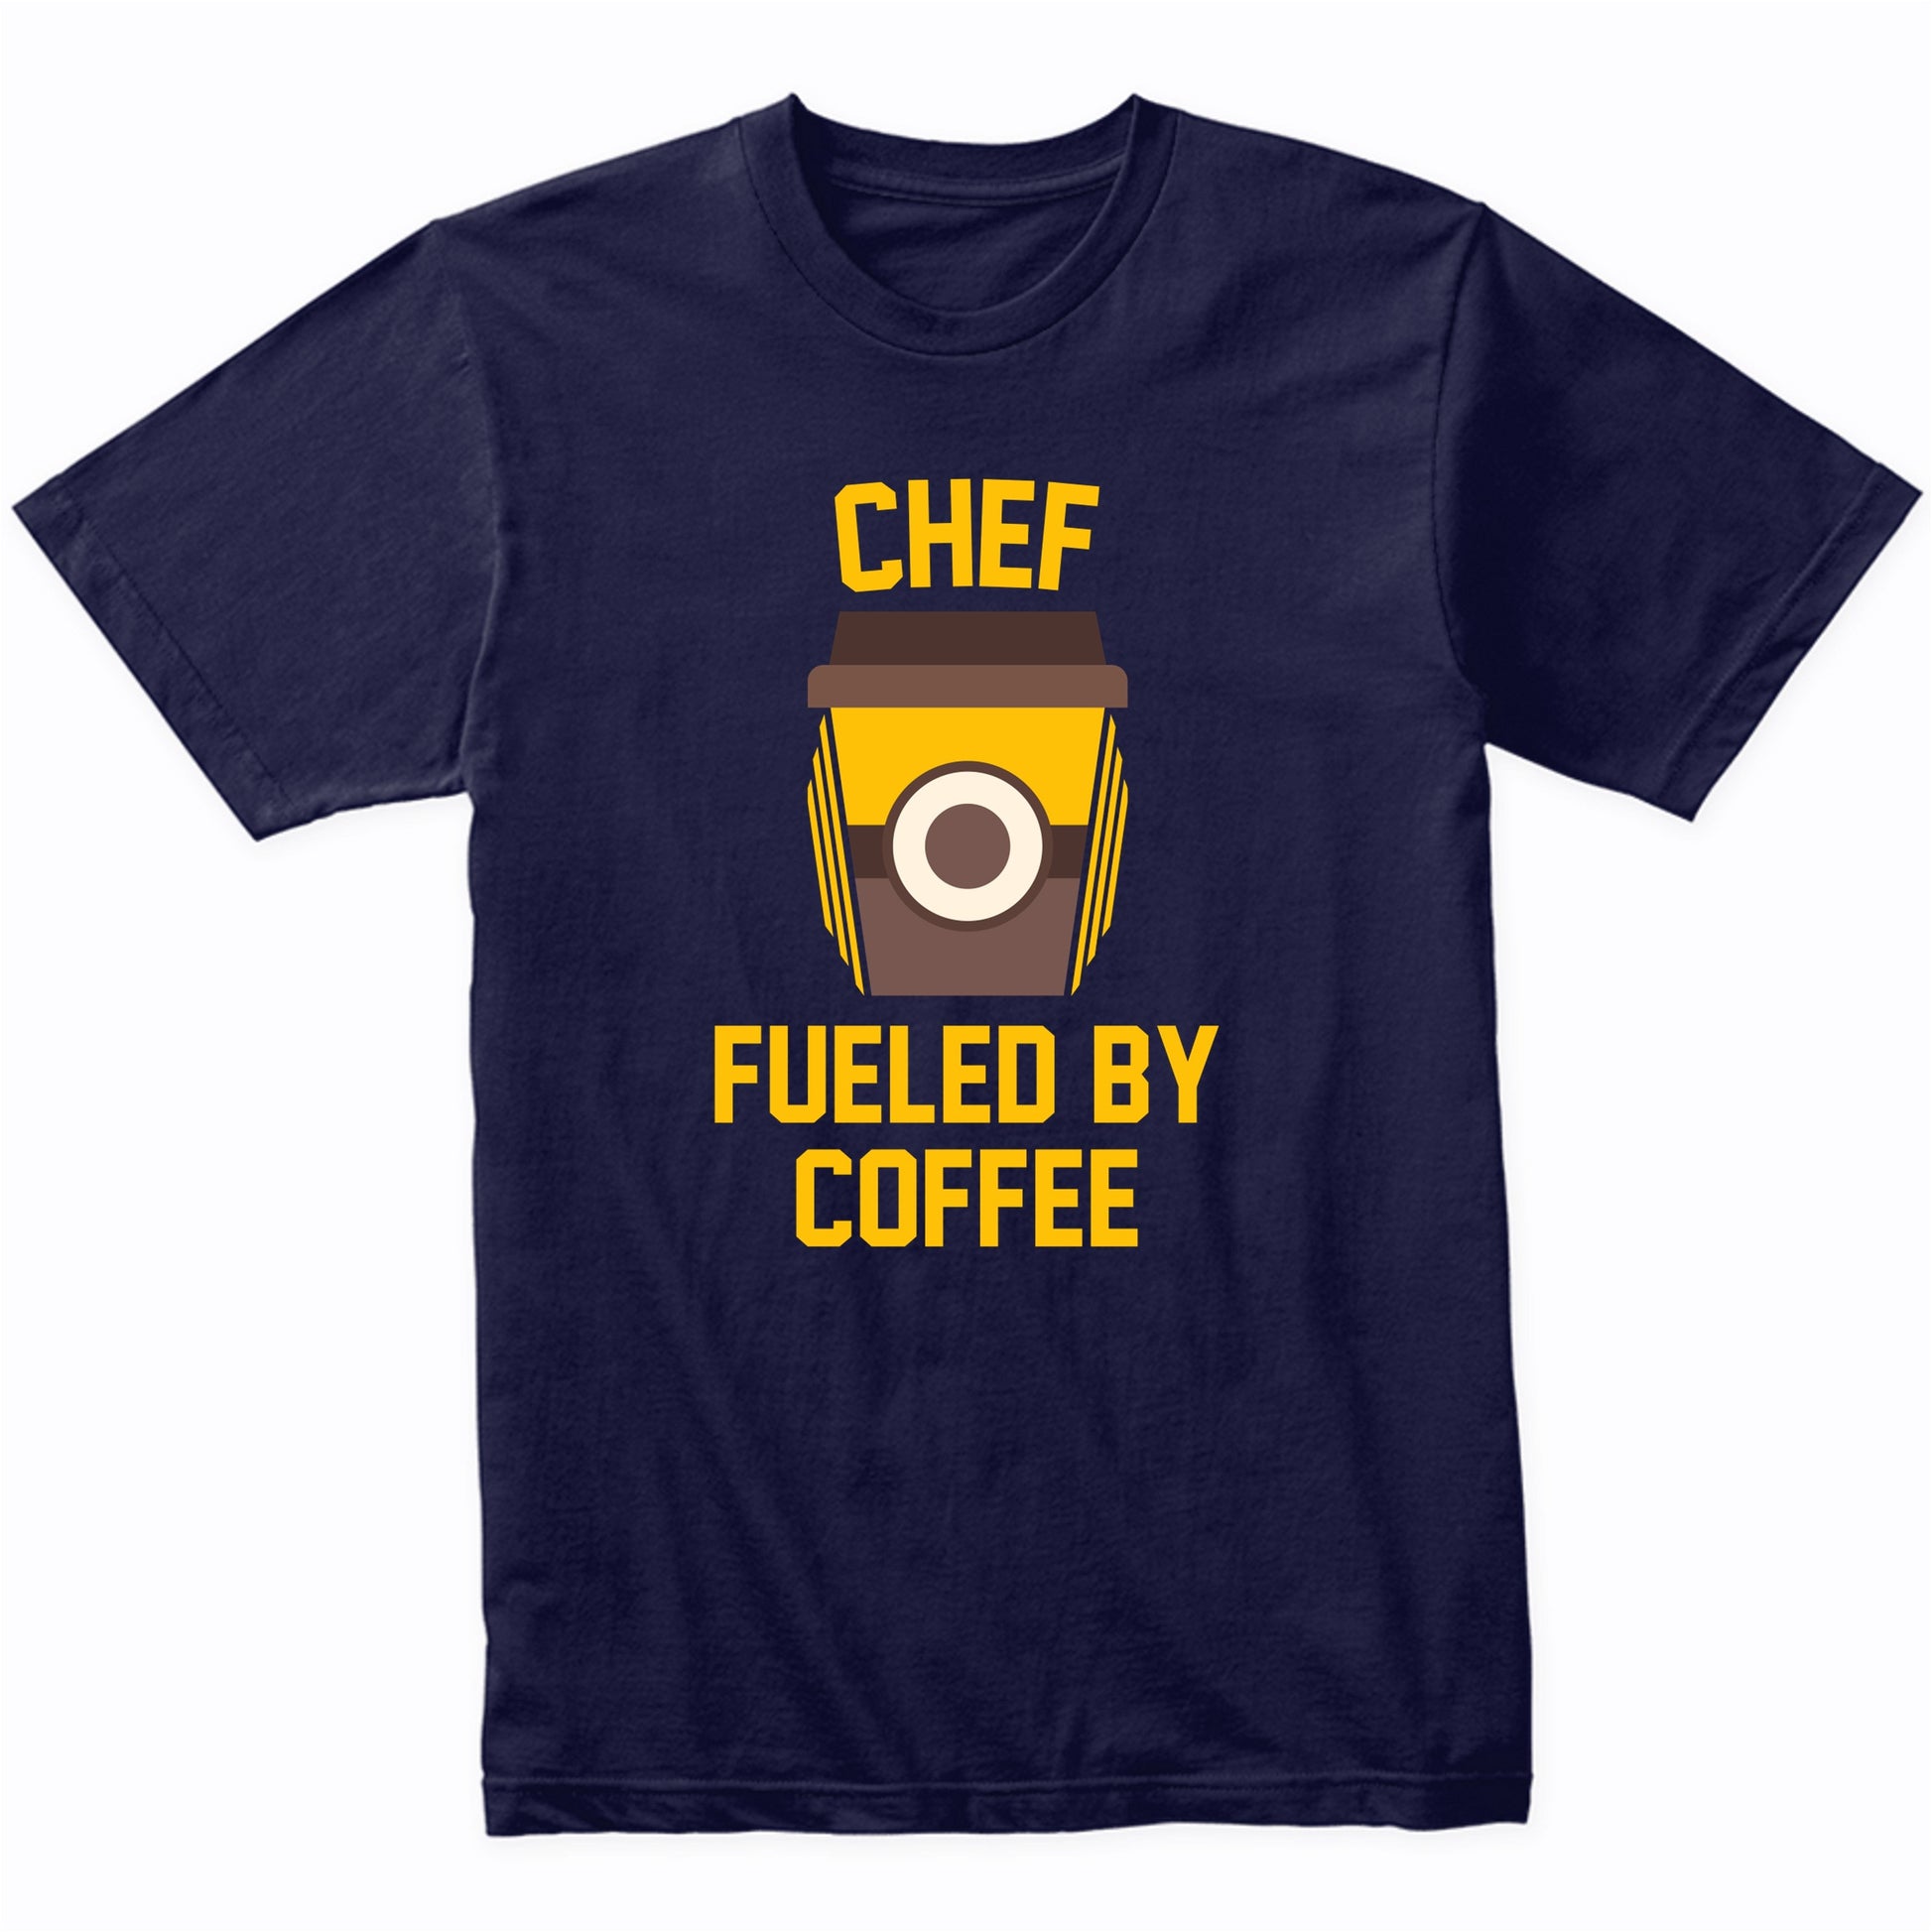 Chef Fueled By Coffee Funny Cooking Shirt